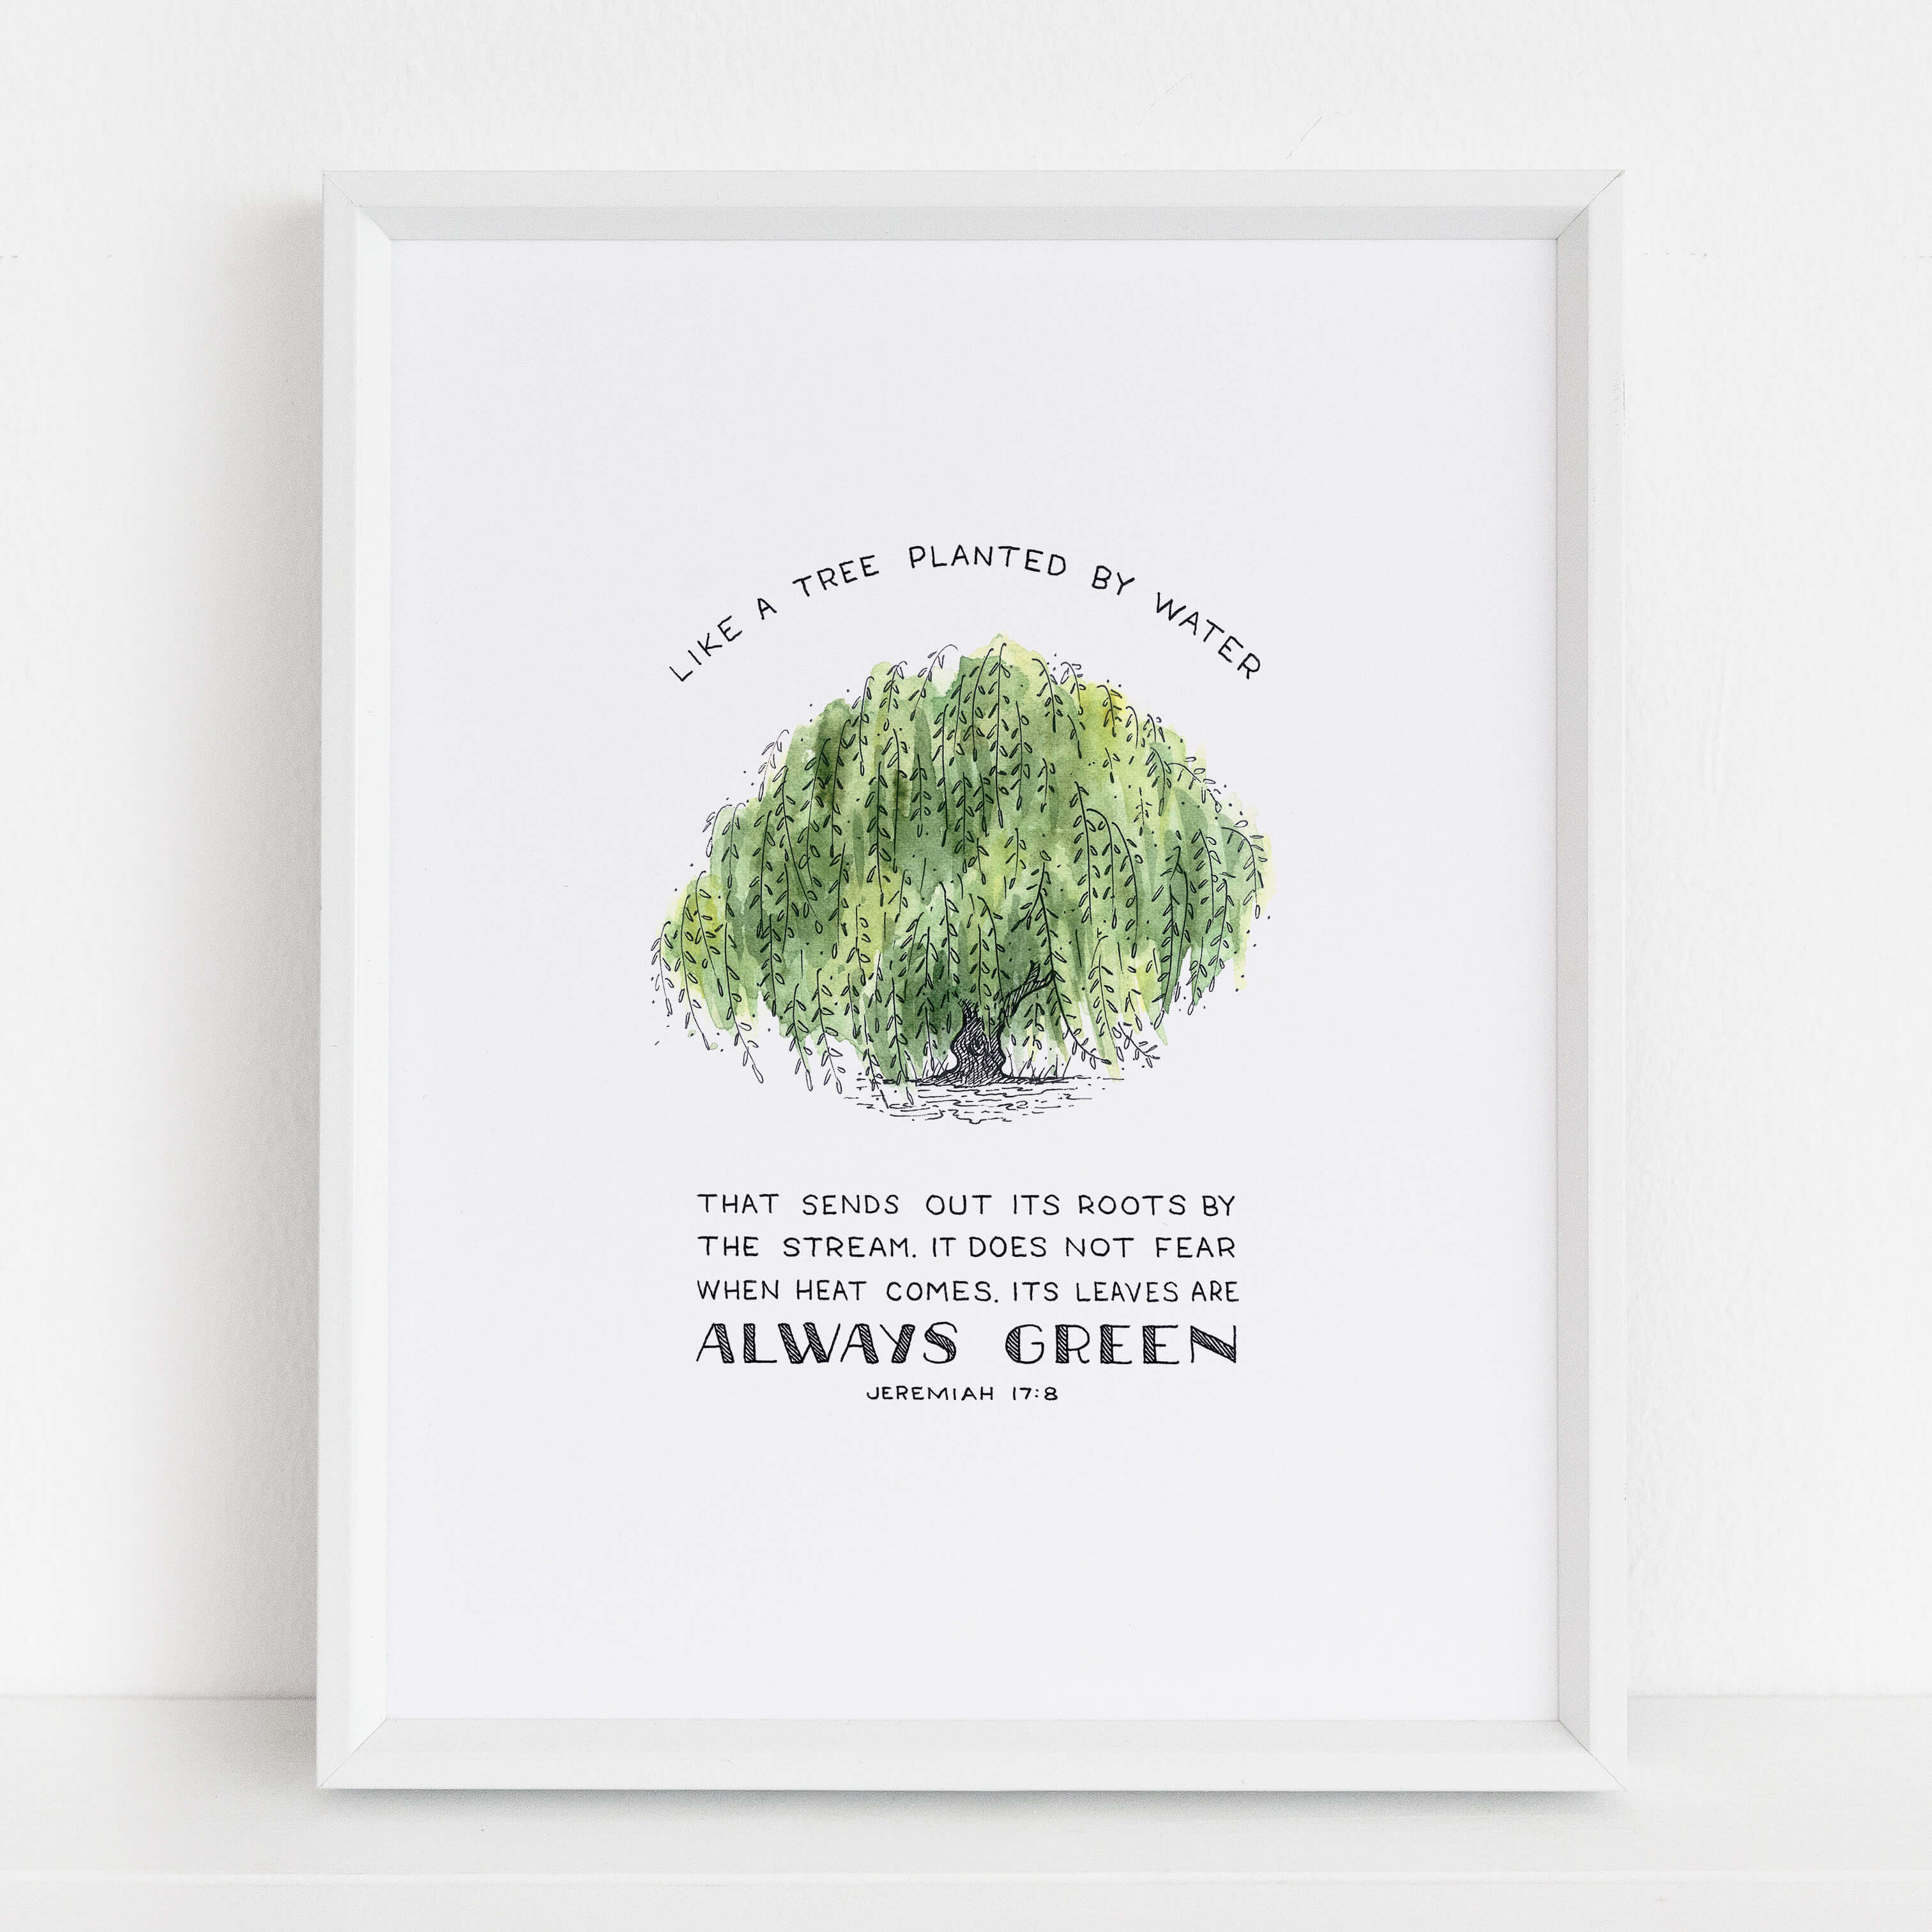 Framed Tree Planted by Water Art Print | Jeremiah 17:8